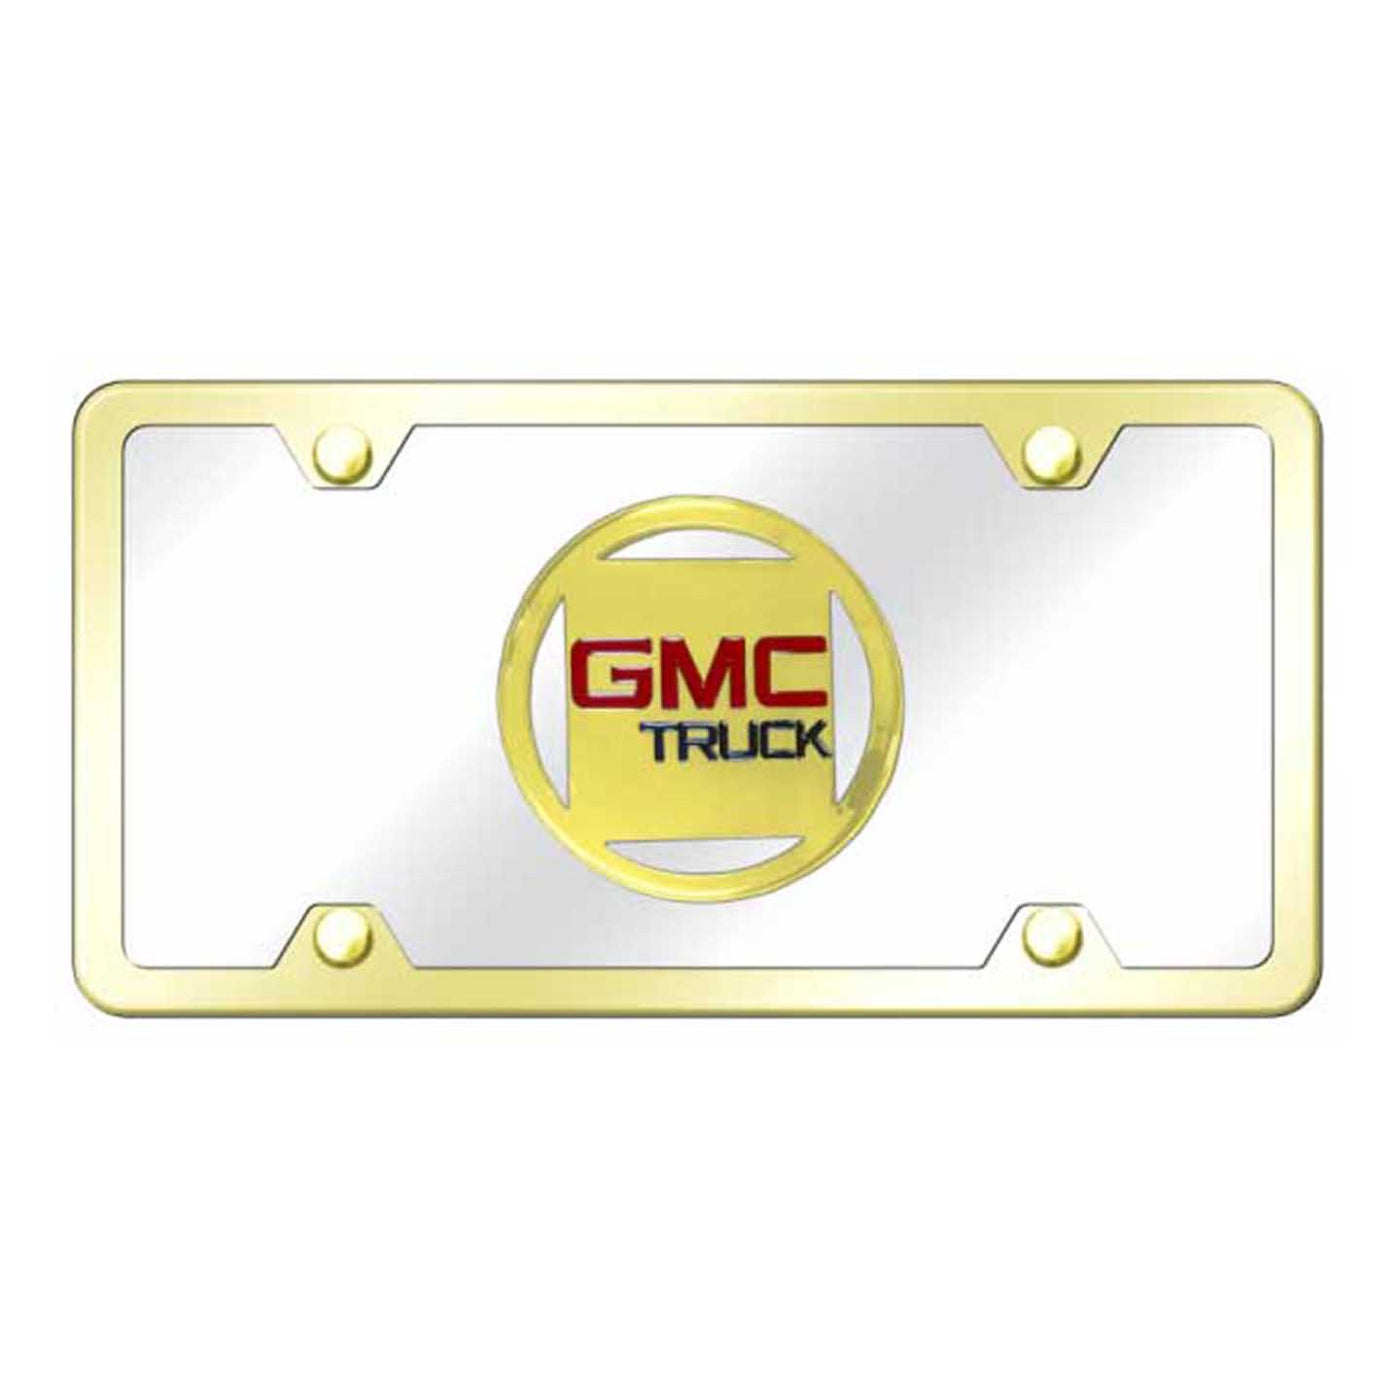 GMC Plate Kit - Gold on Mirrored